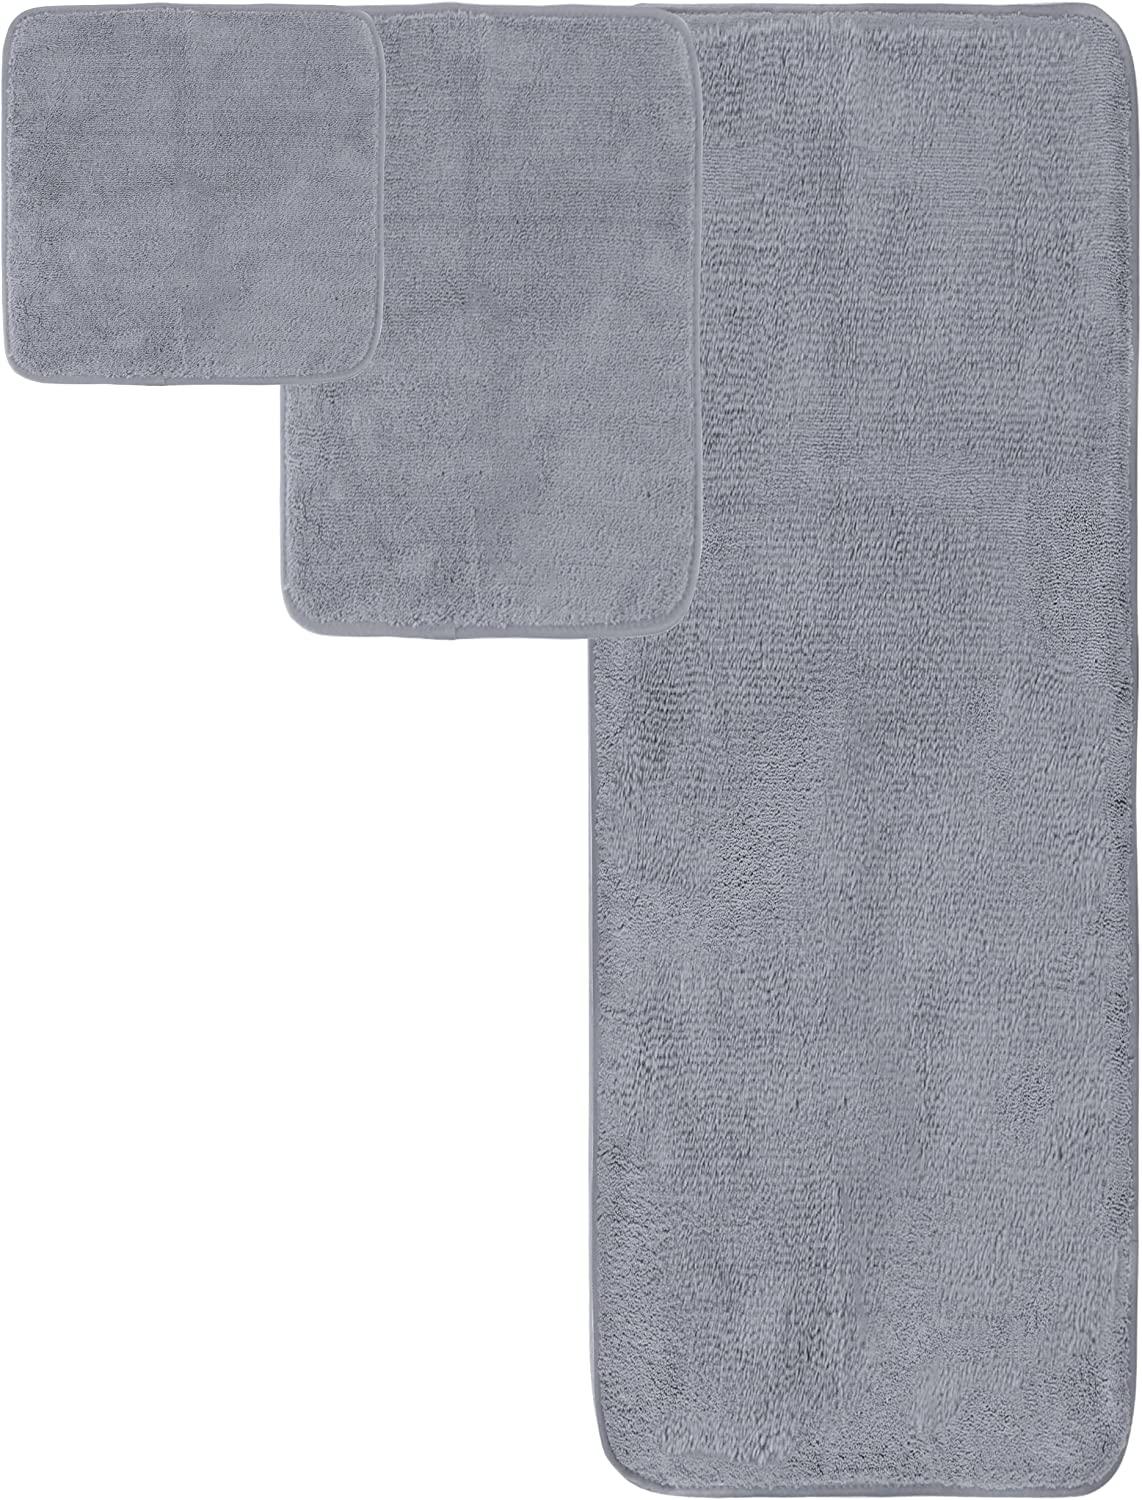  POLYTE Microfiber Quick Dry Lint Free Bath Towel, 57 x 30 in,  Pack of 4 (Blue) : Home & Kitchen